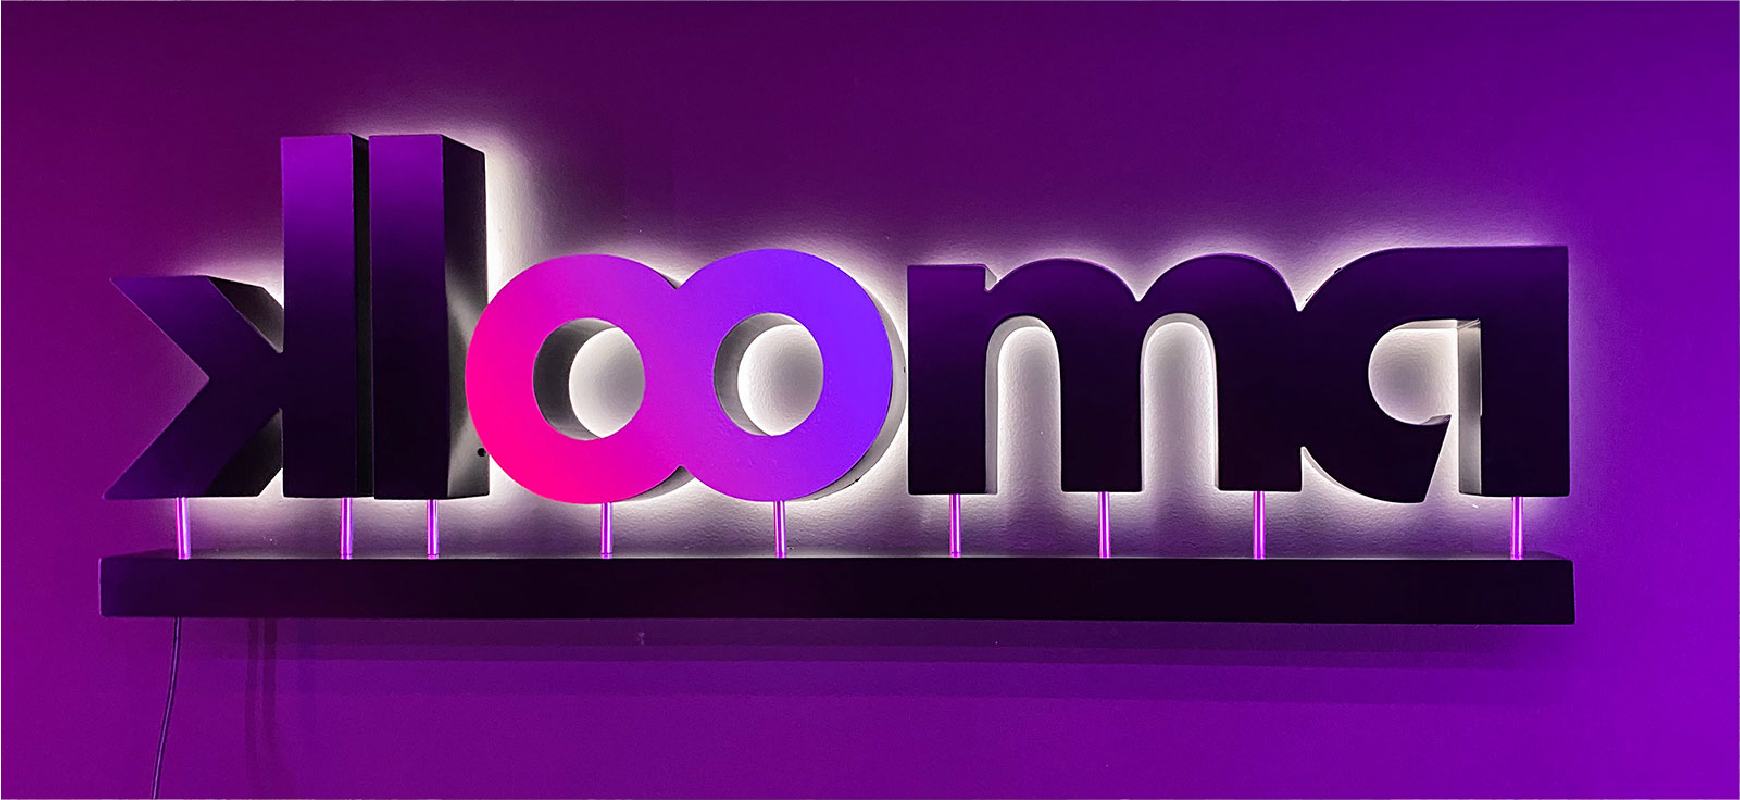 Klooma business letter sign in purple hues with back illumination made of aluminum and lexan